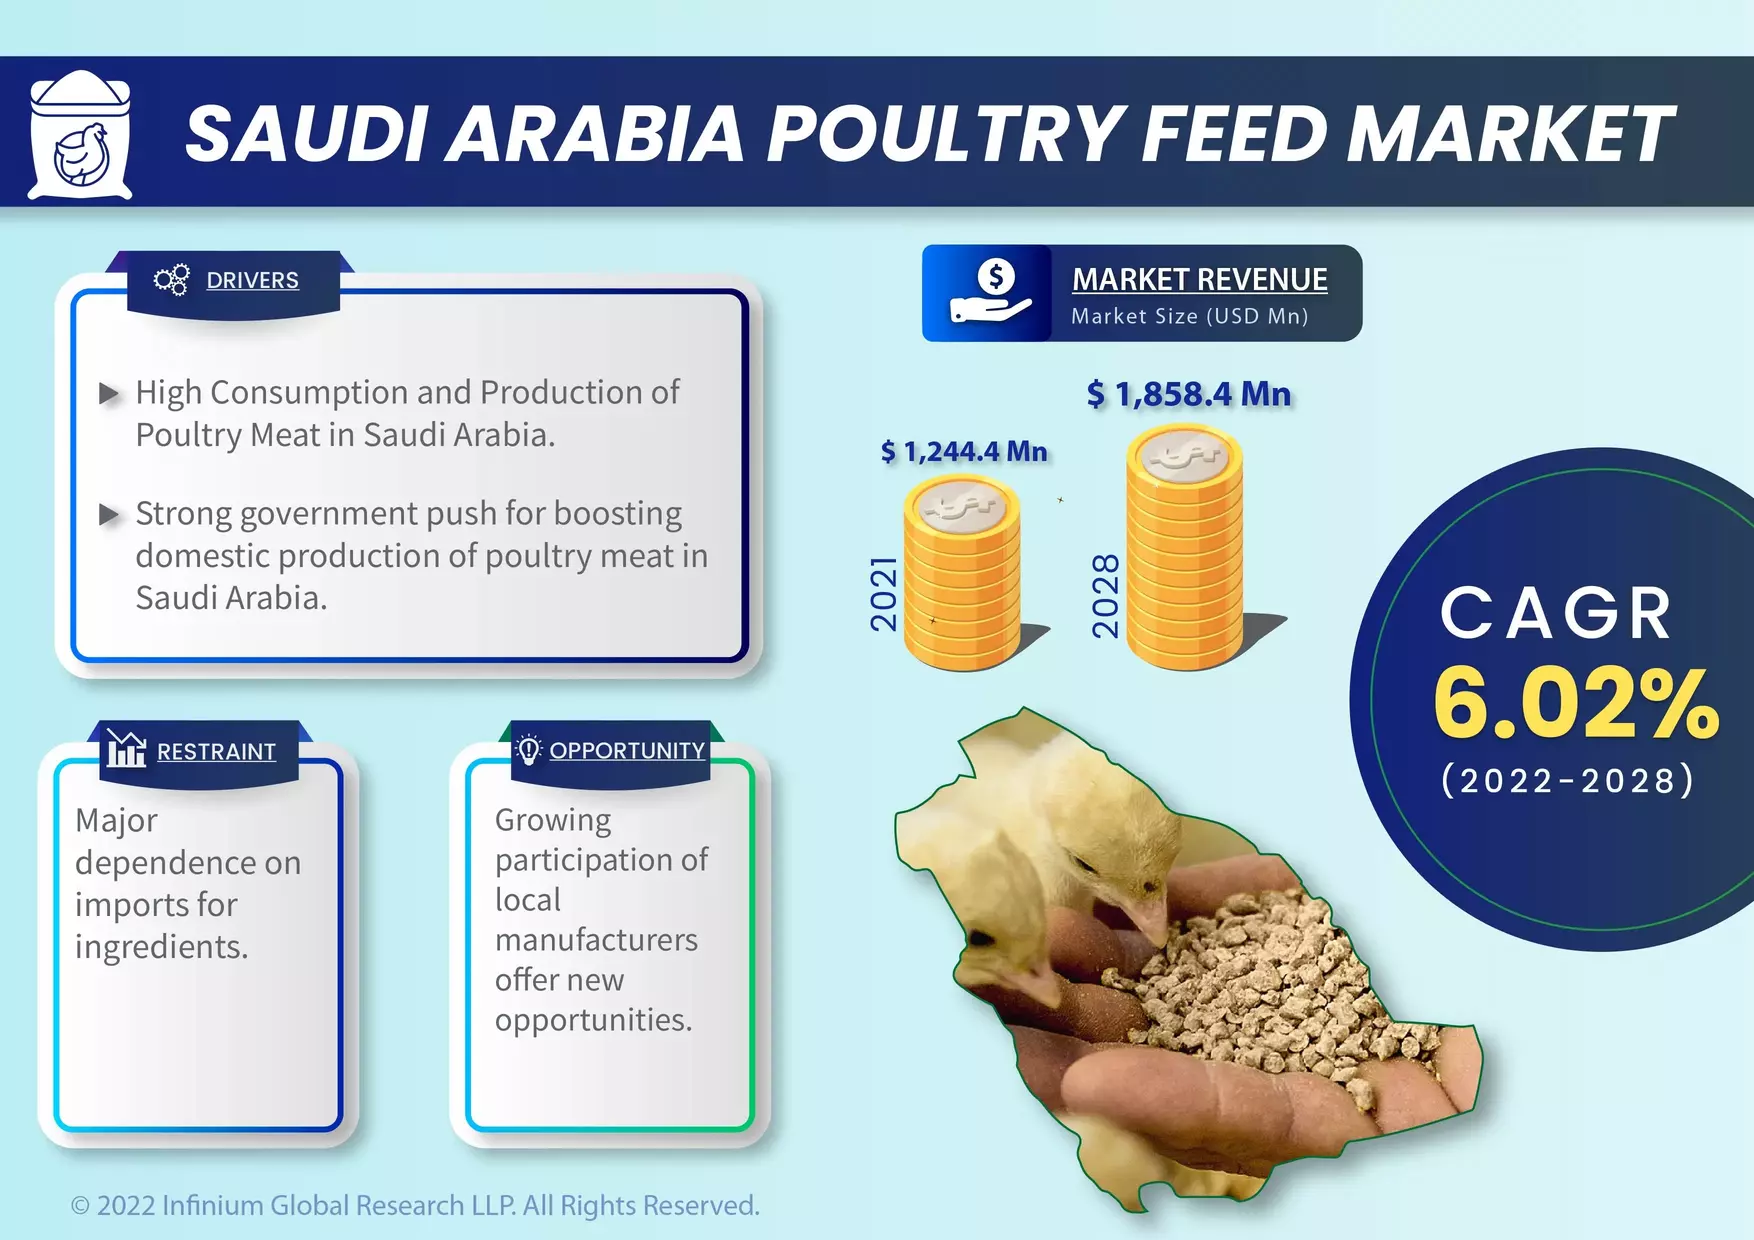 Saudi Arabia Poultry Feed Market Was Valued at USD 1,244.4 Million in 2021 and is Expected to Reach USD 1,858.4 Million by 2028 and Grow at a CAGR of 6.02% Over the Forecast Period 2022-2028.